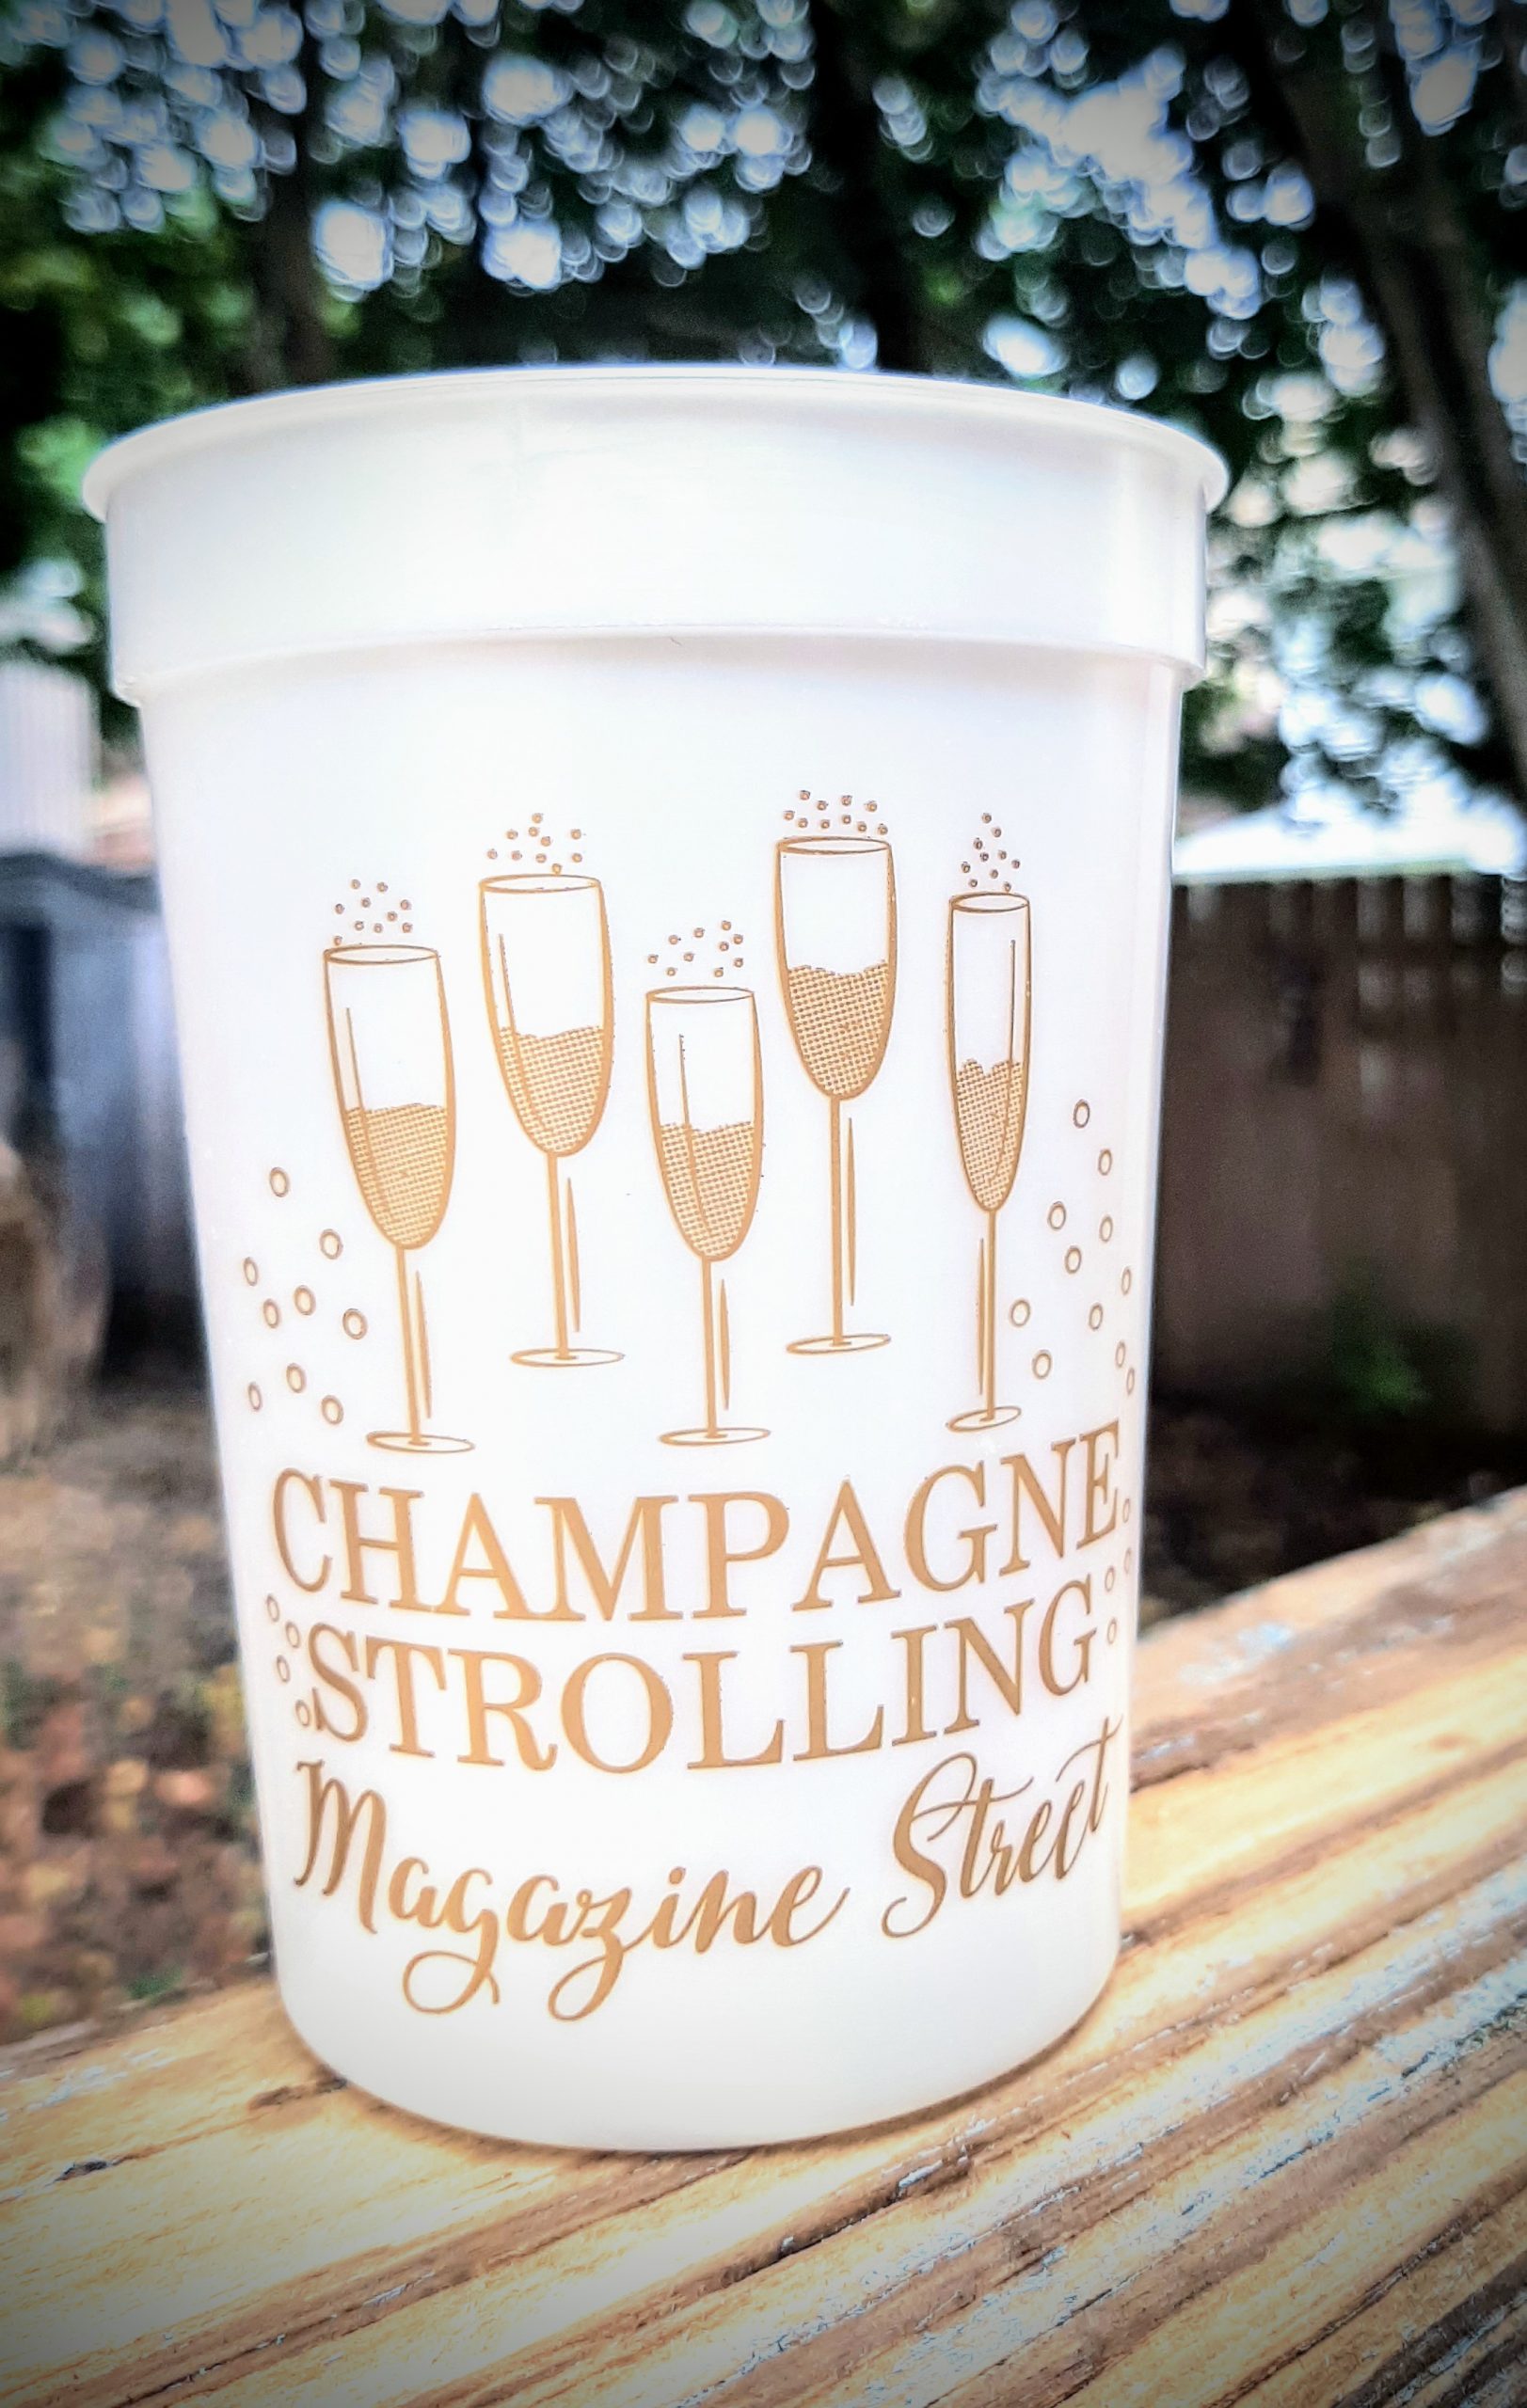 Champagne Strolling signals the start of a Magazine Street revival